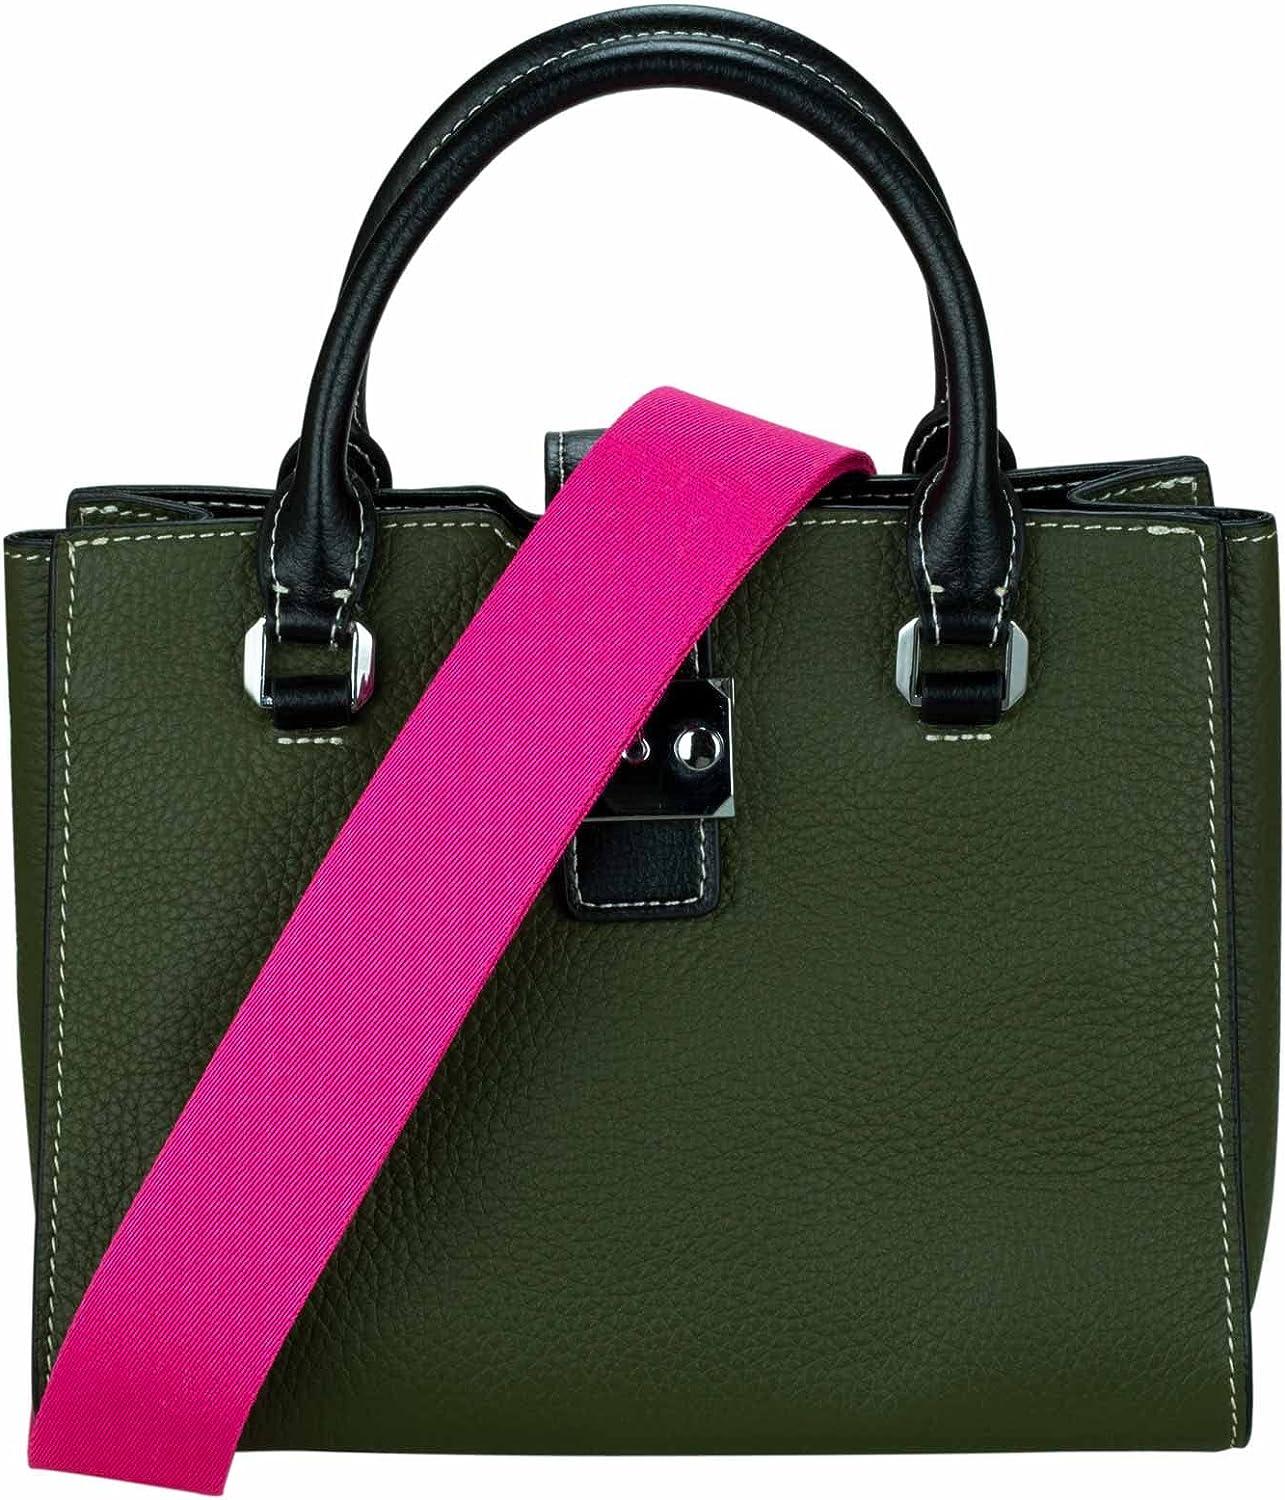 Thick Leather Strap for Handbag With Golden Clasp Hardware 